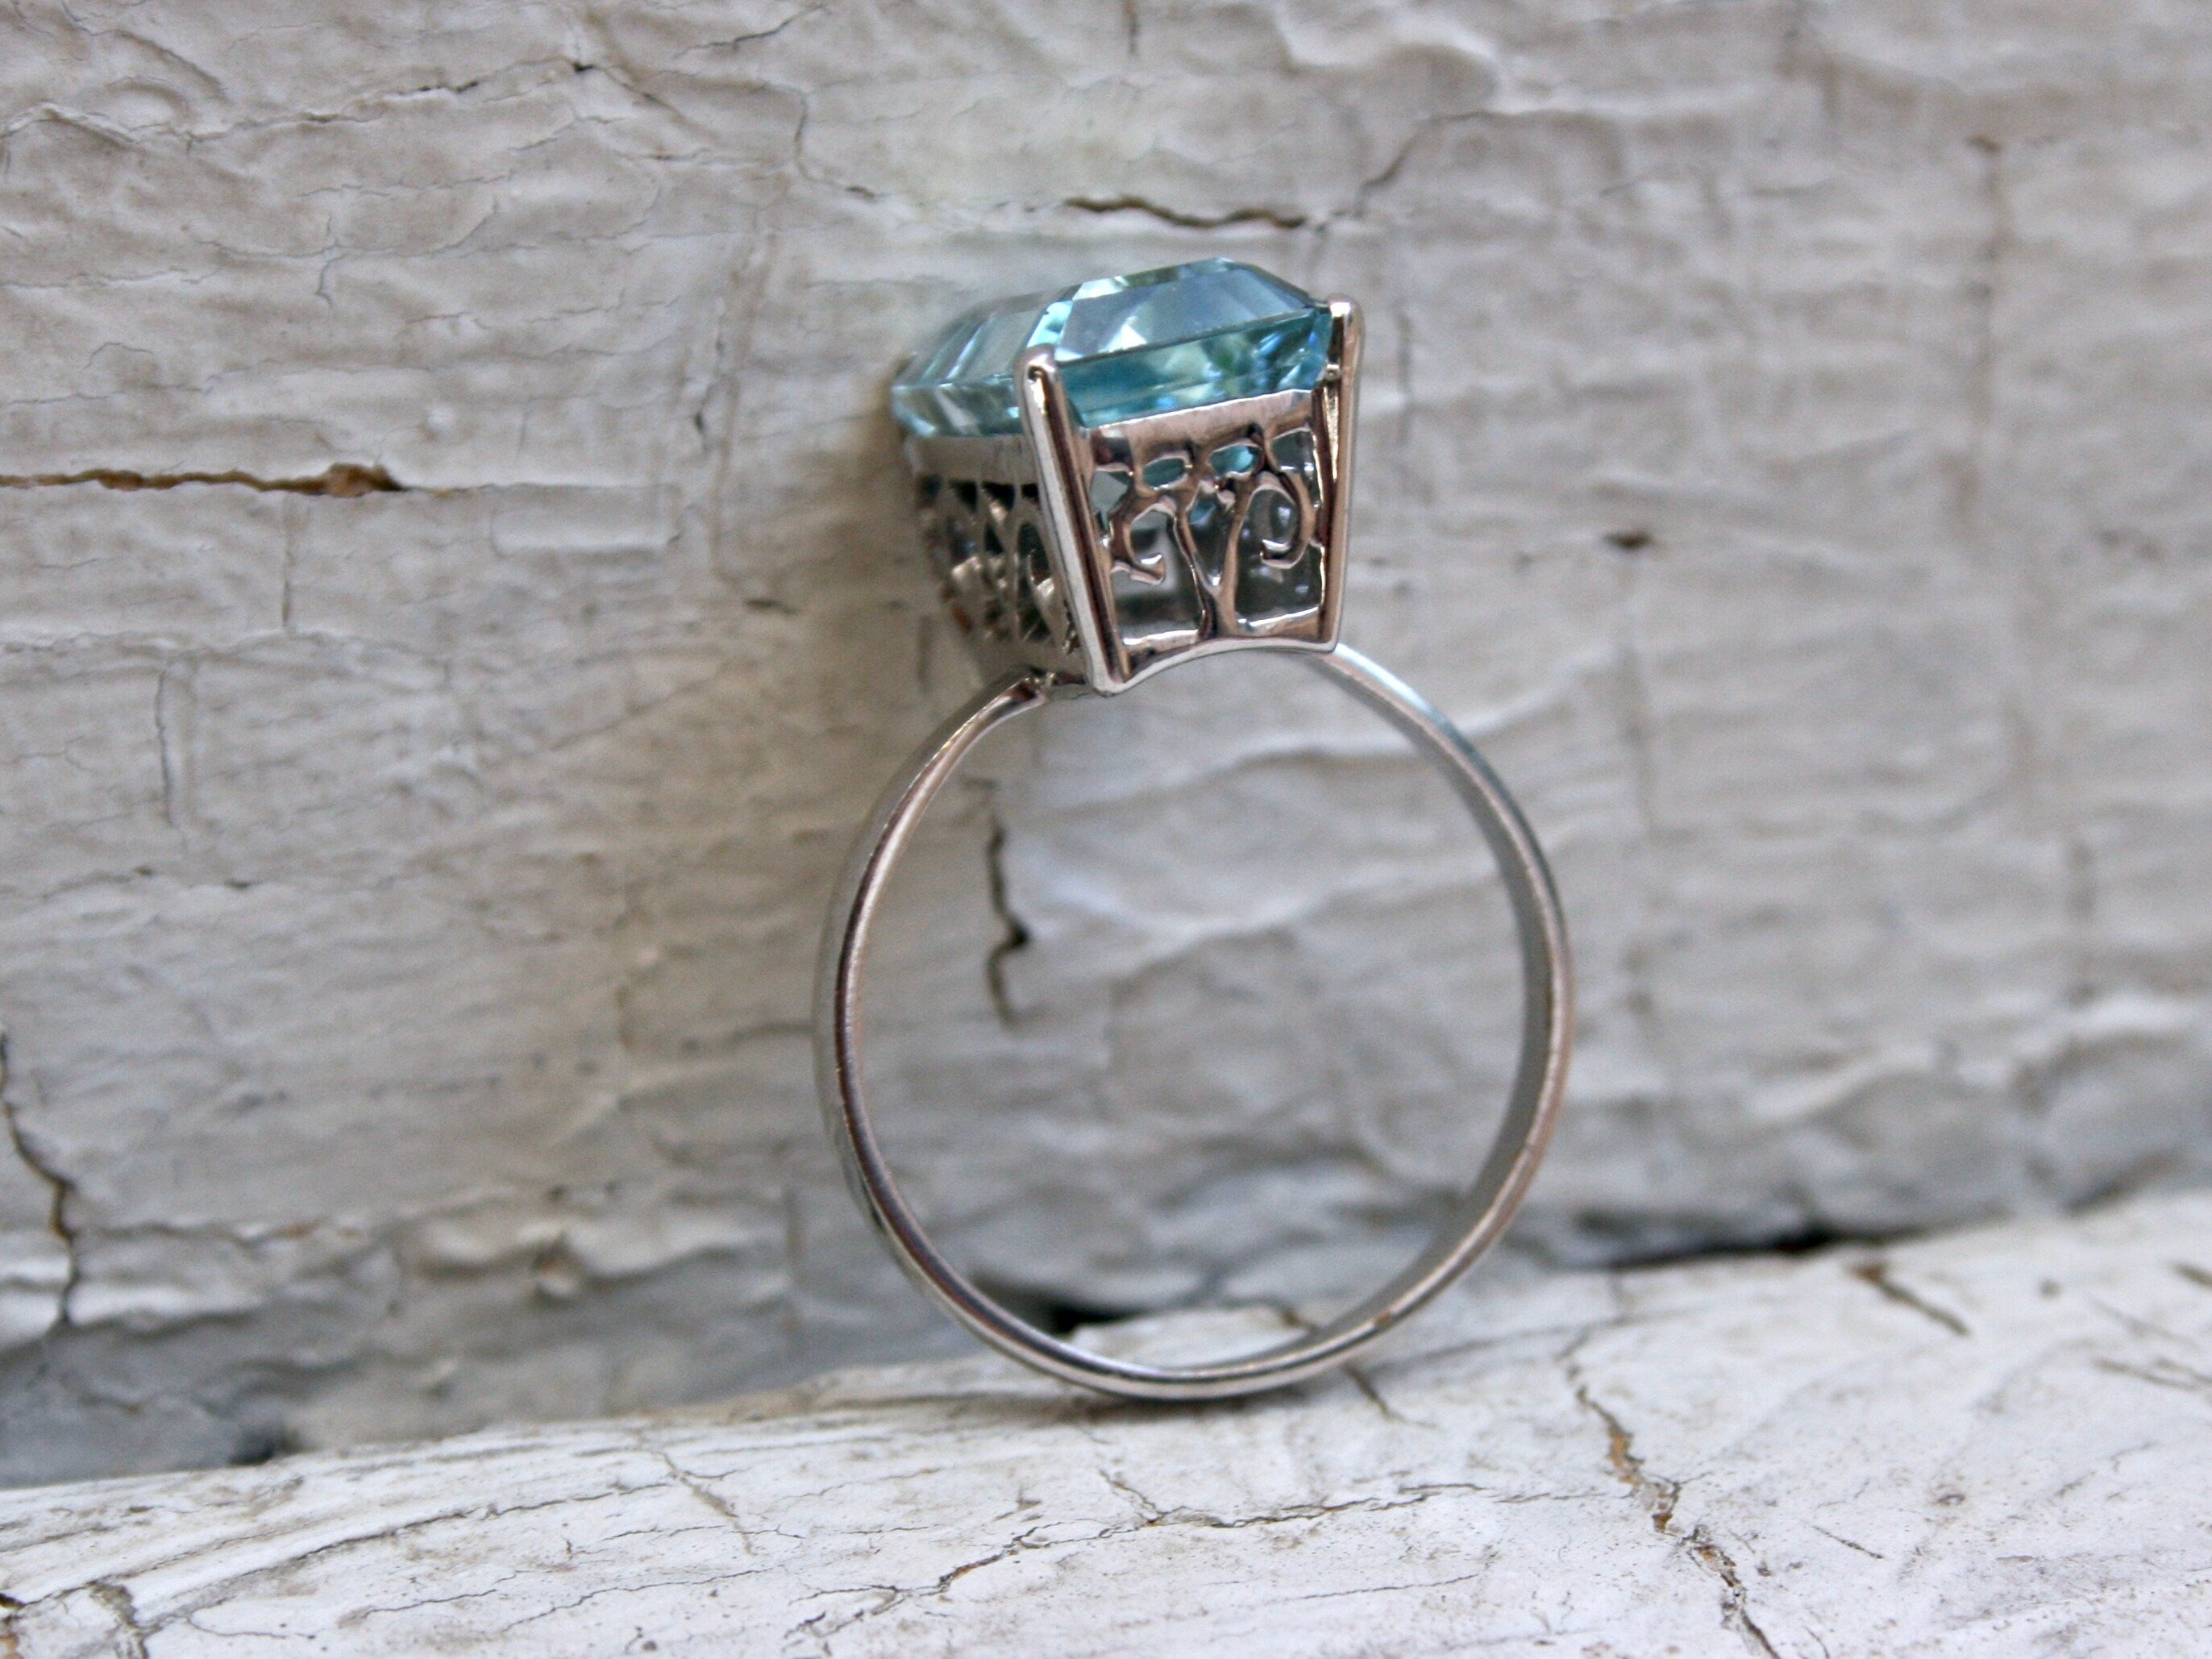 Vintage Aquamarine Solitaire Ring Engagement Ring in 18K White Gold - 6.00ct.